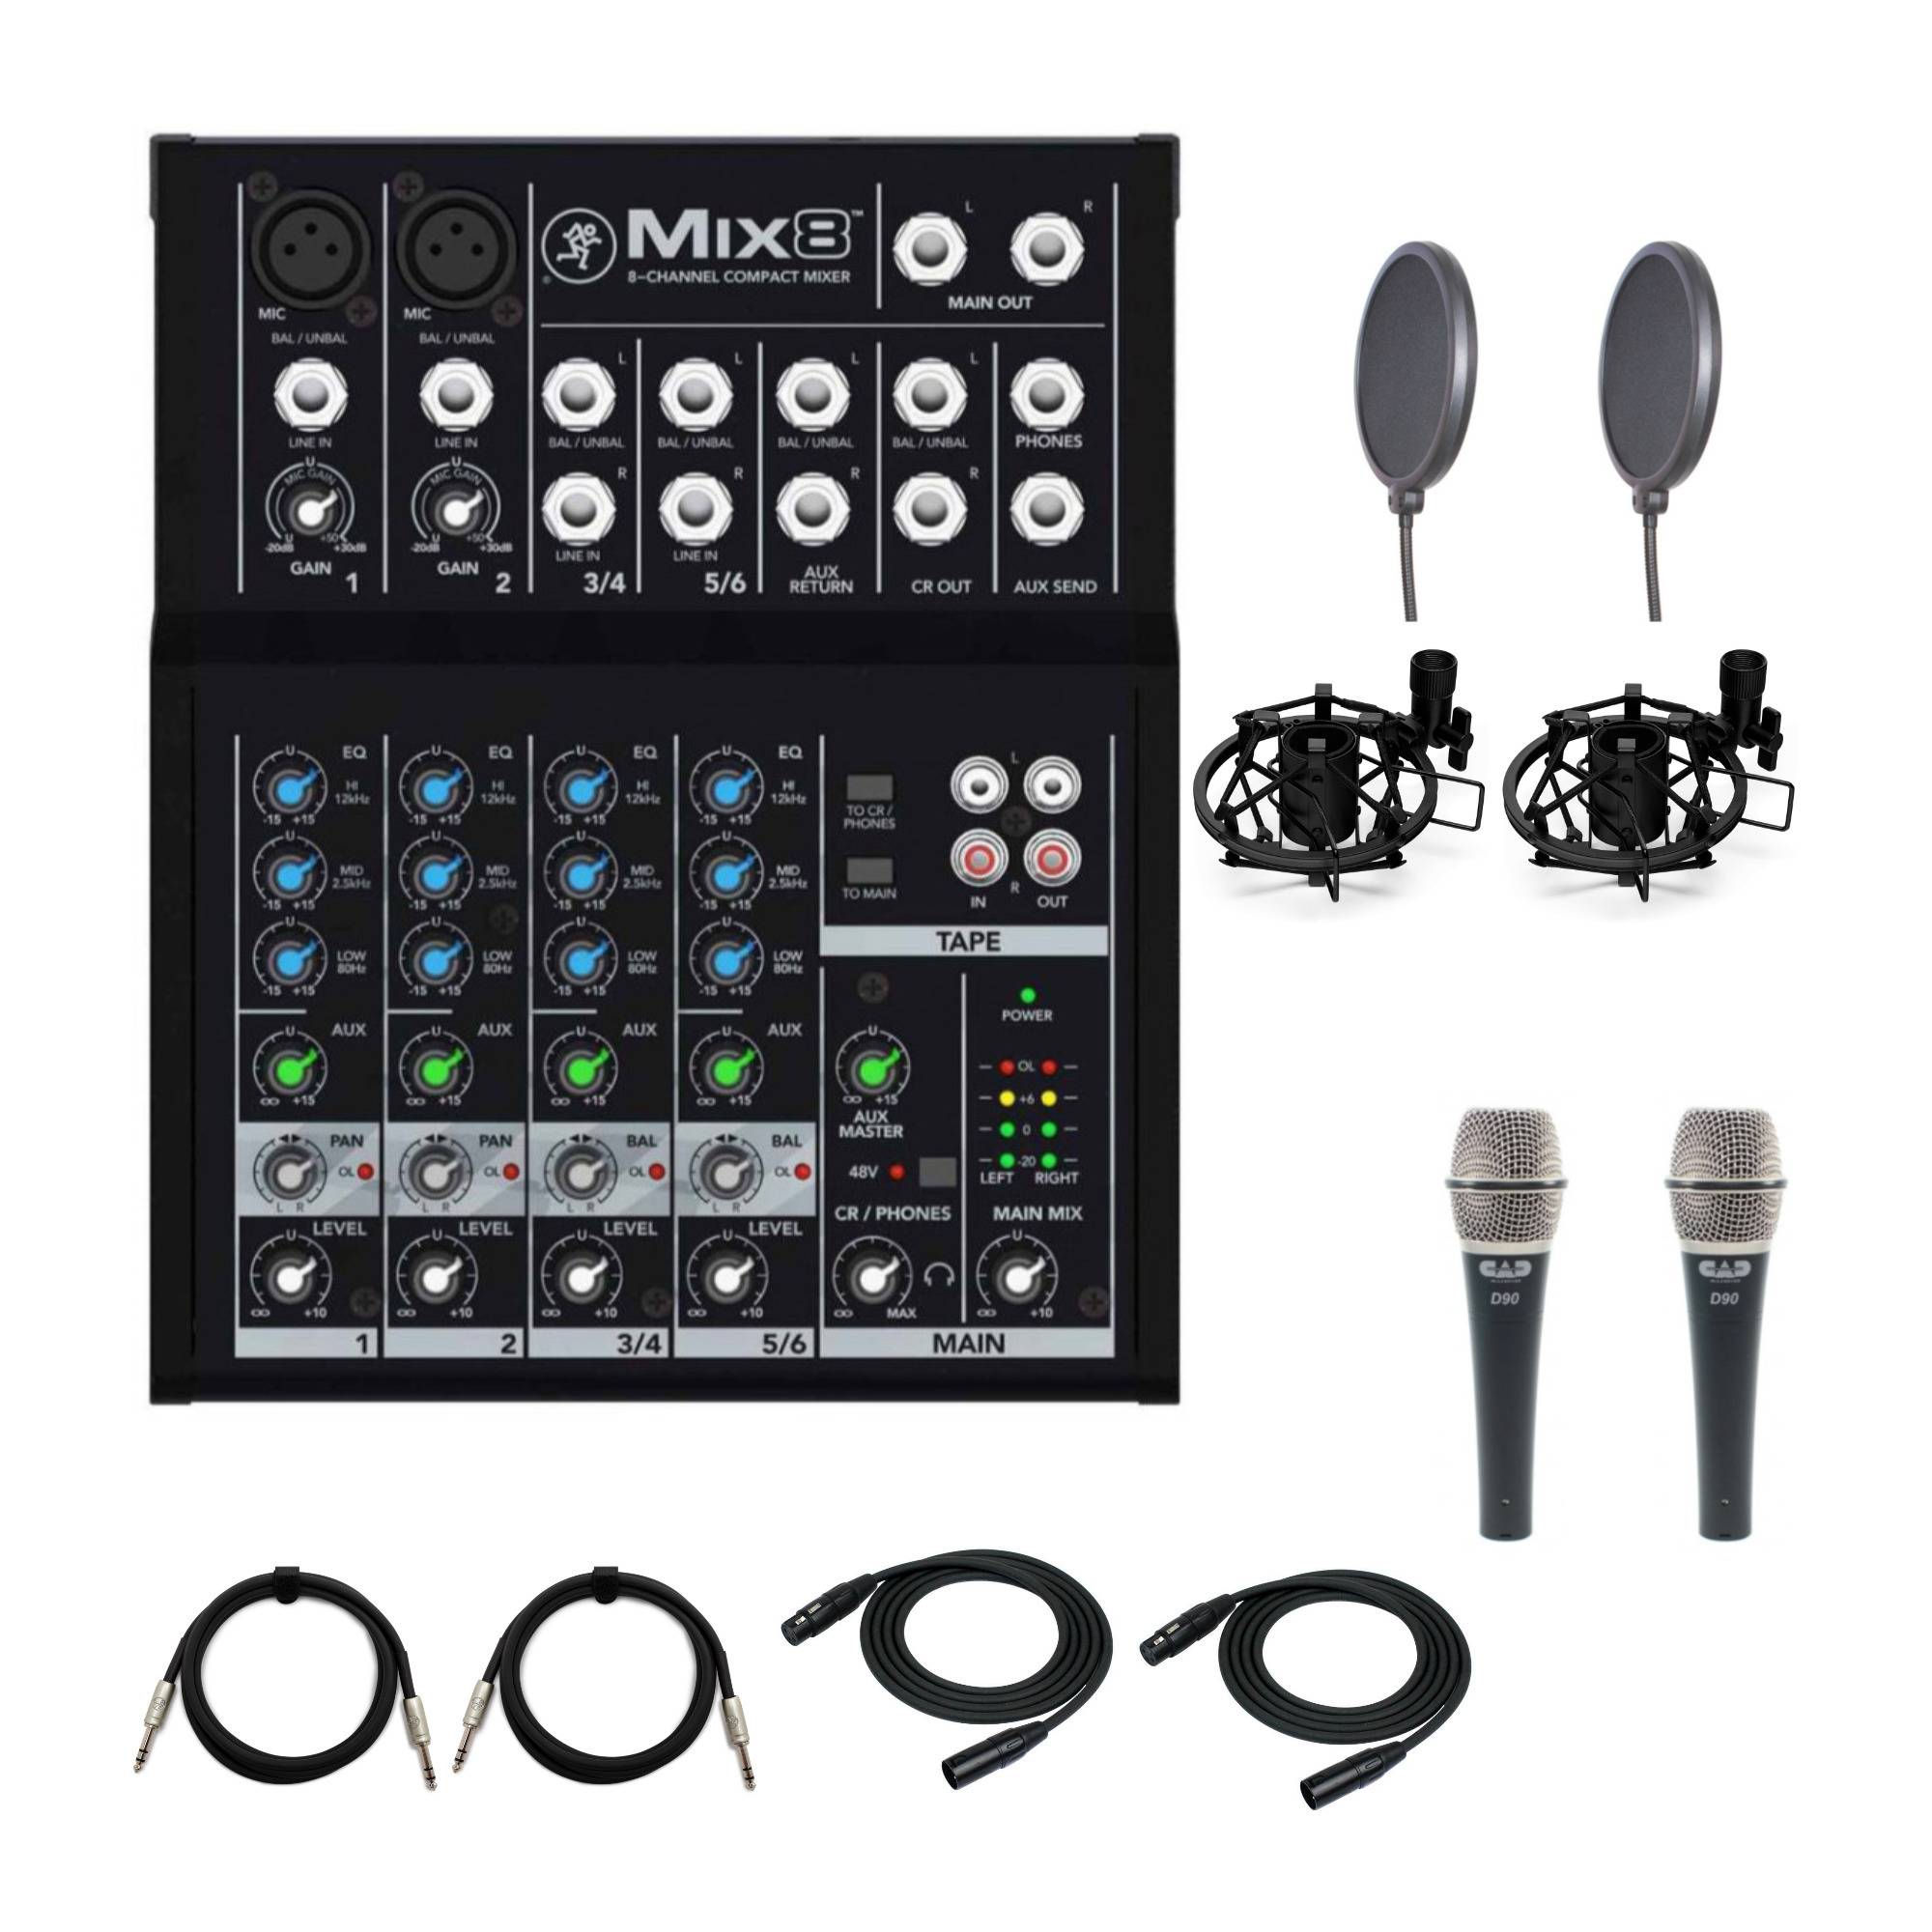 Mackie Mix8 8-Channel Compact Mixer Bundle with CAD Audio D90 Microphone and Accessories